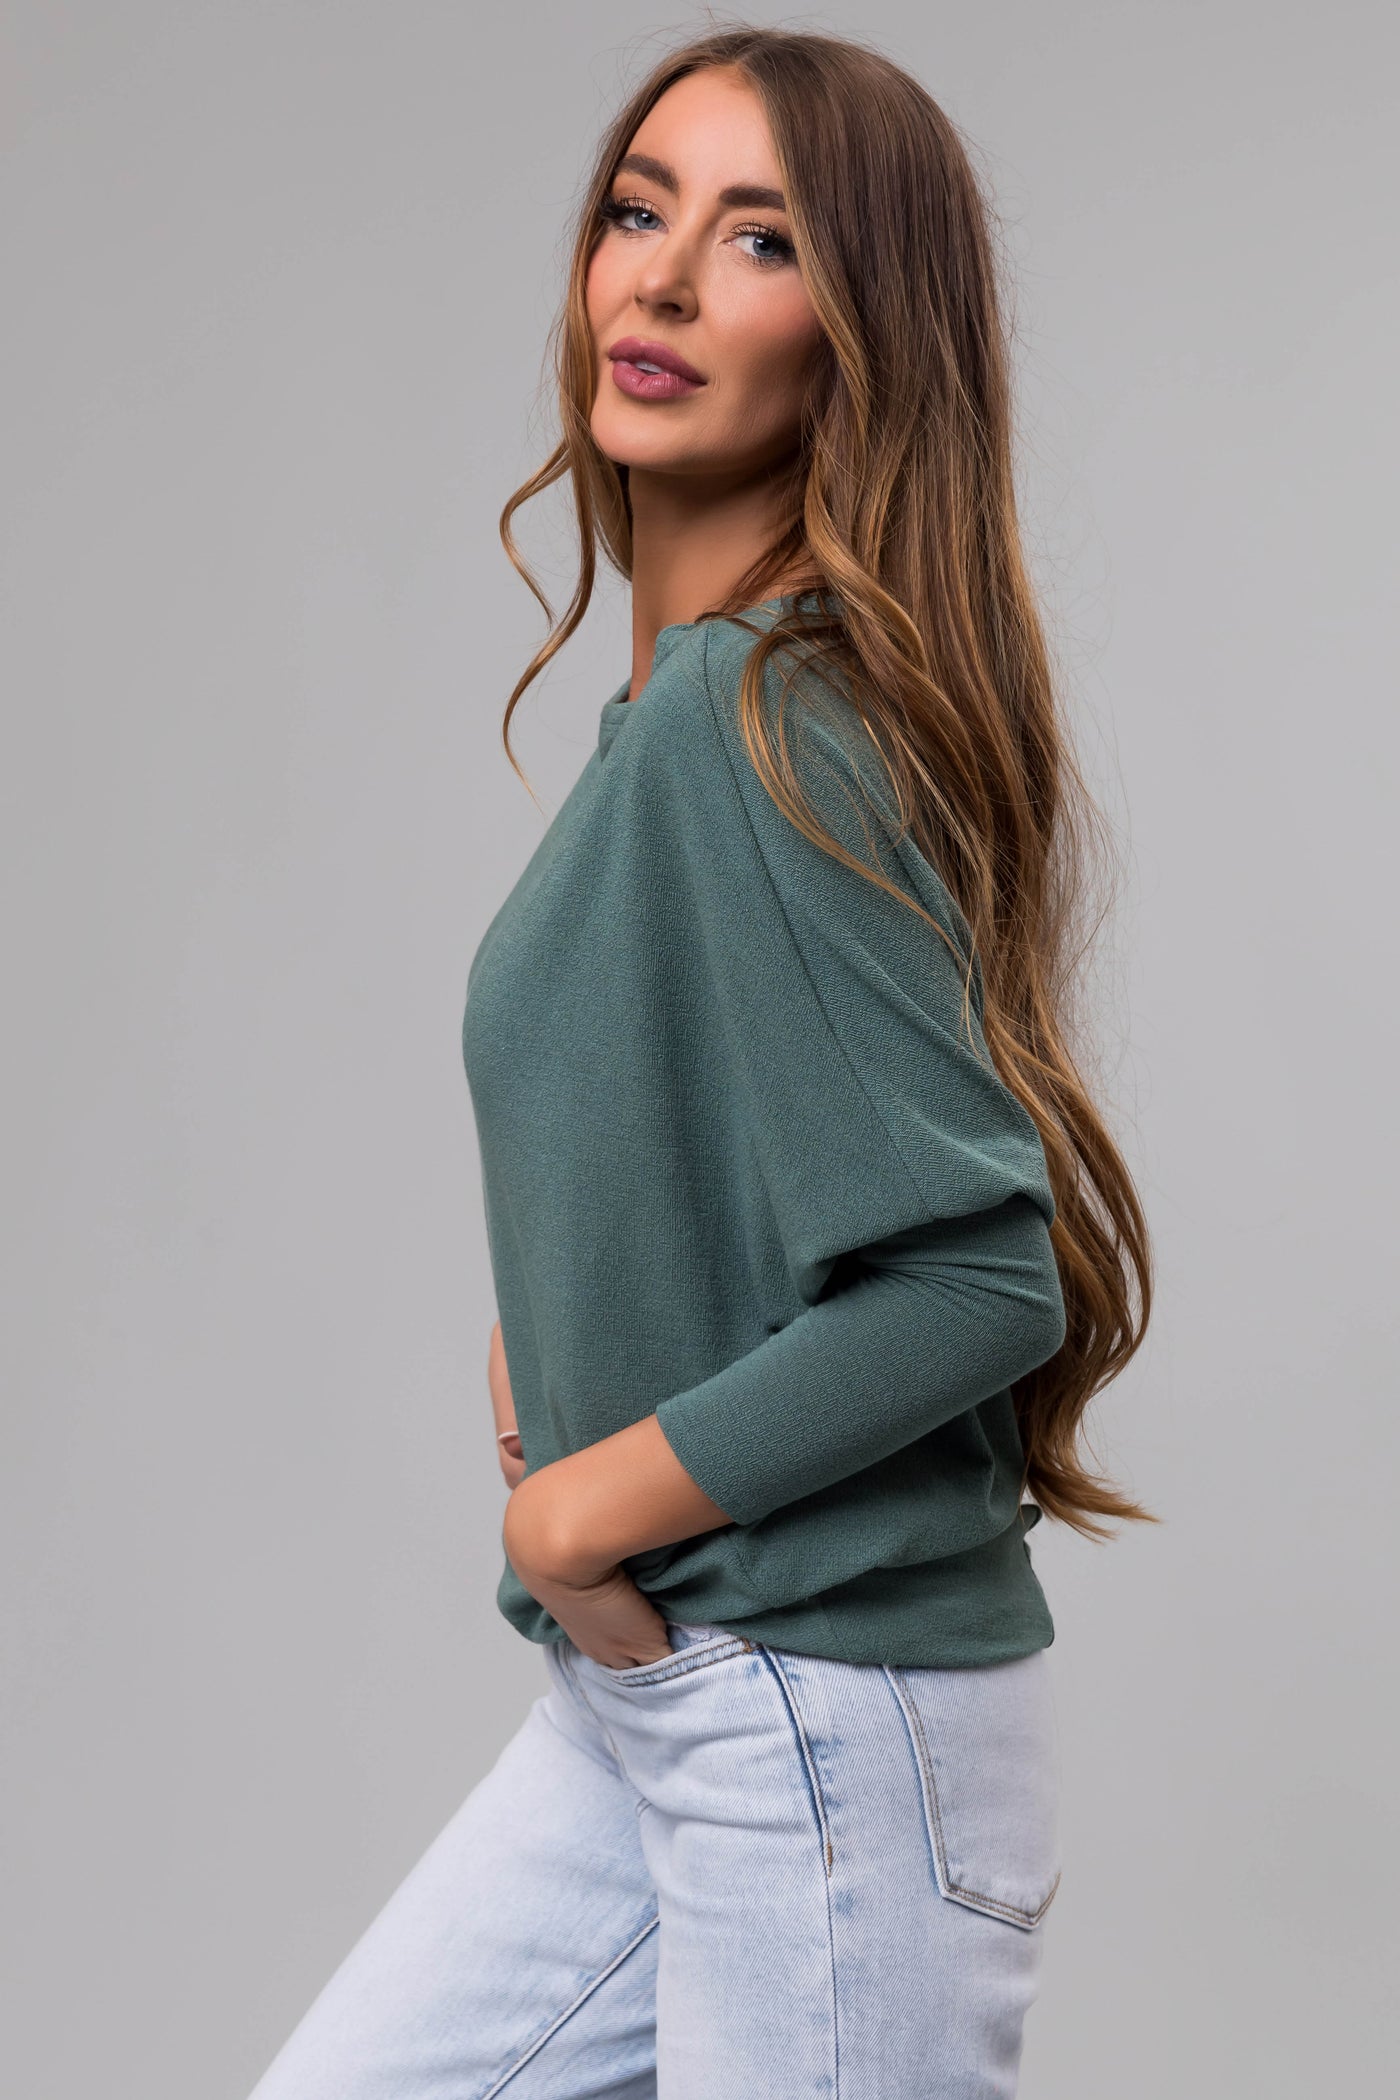 Faded Pine Round Neck Knit Top with Long Dolman Sleeves